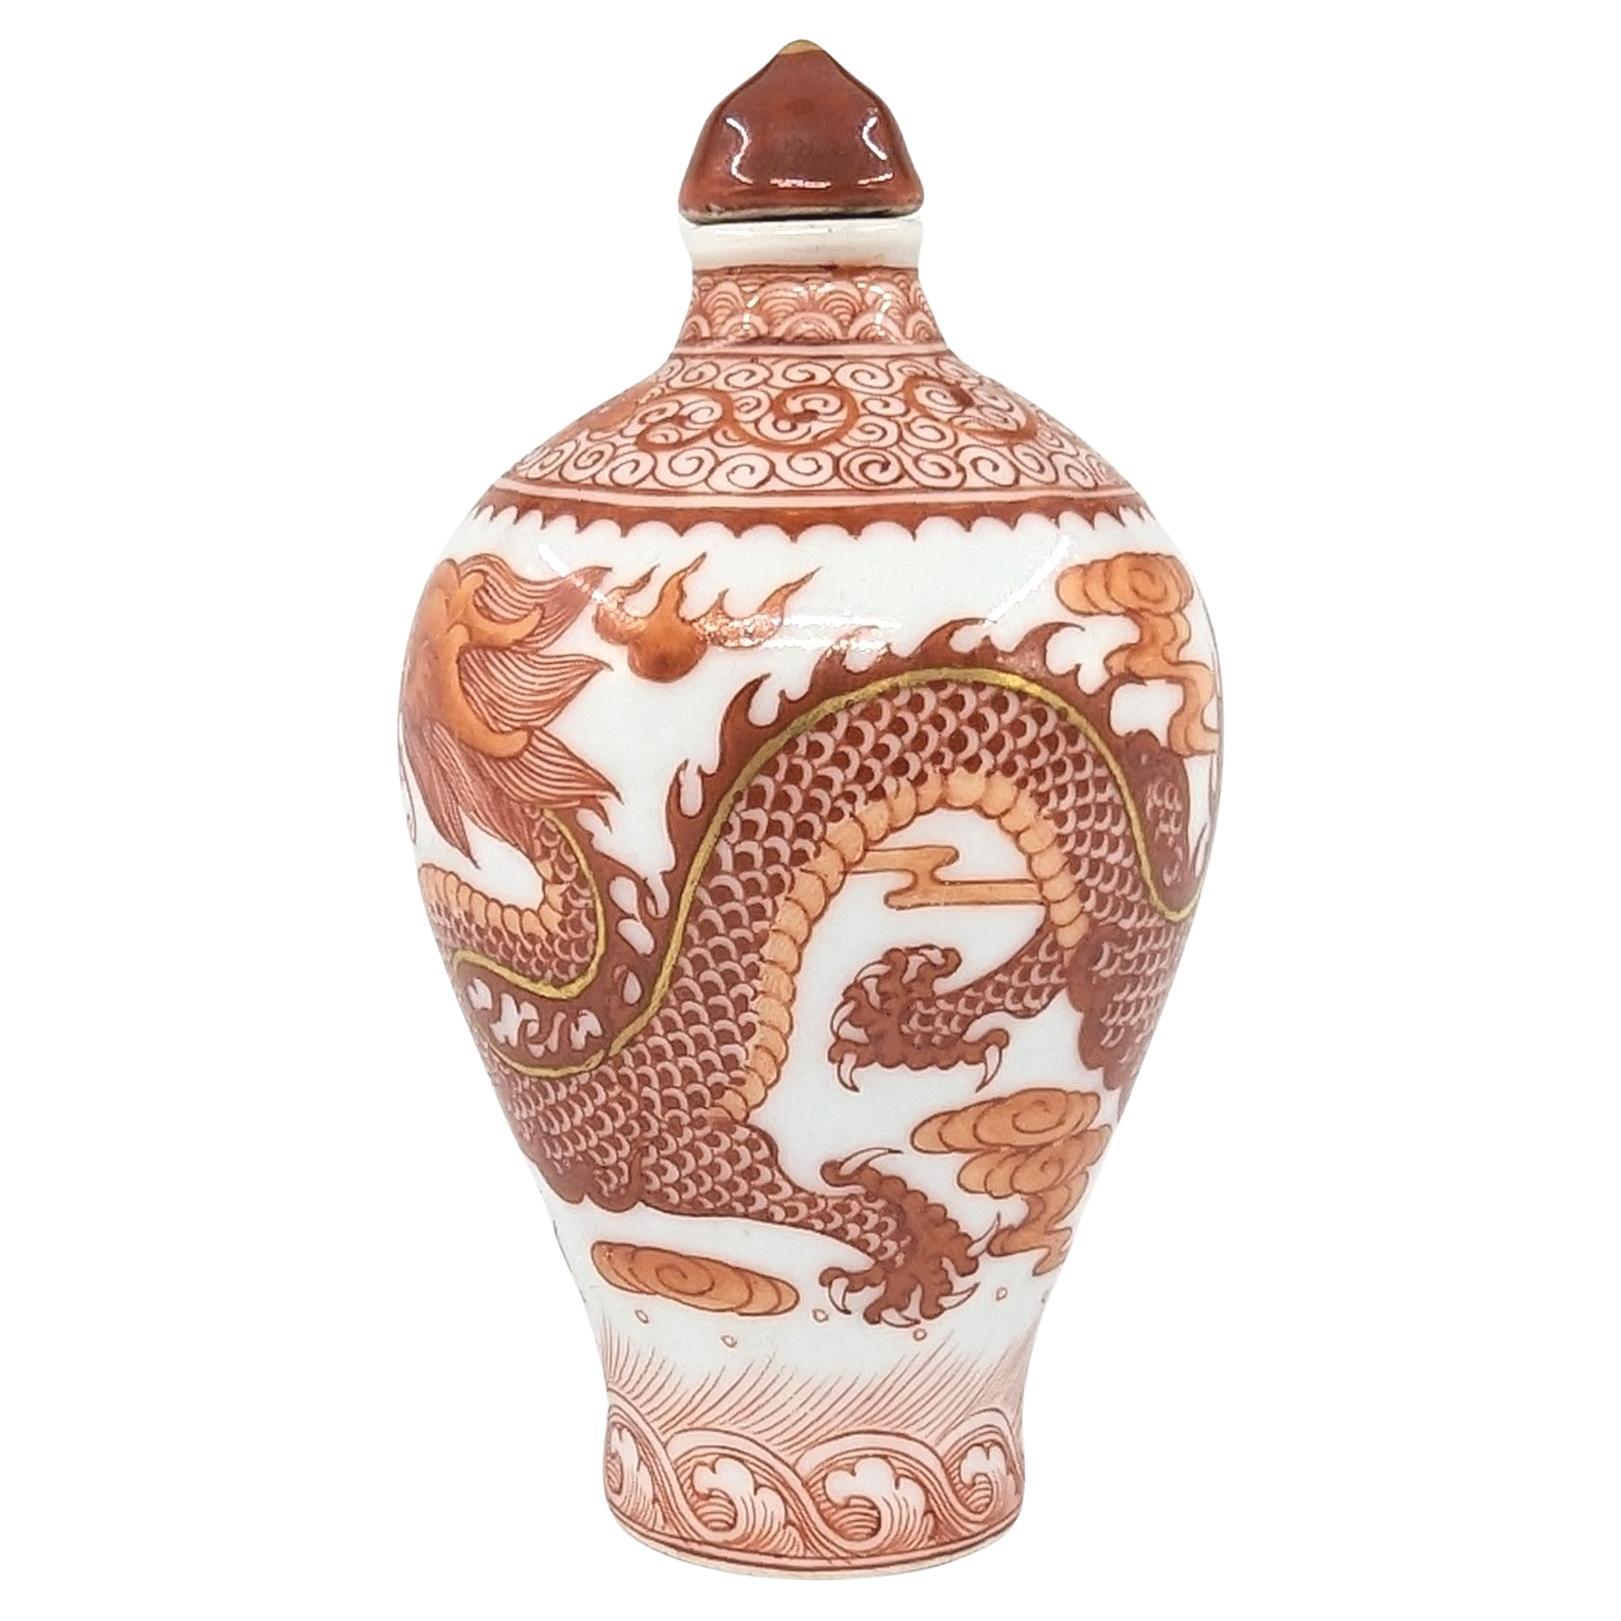 Antique Chinese porcelain snuff bottle in baluster form, finely painted in iron red, of a scaly five clawed dragon among clouds and flames, with spine decorated in polished 